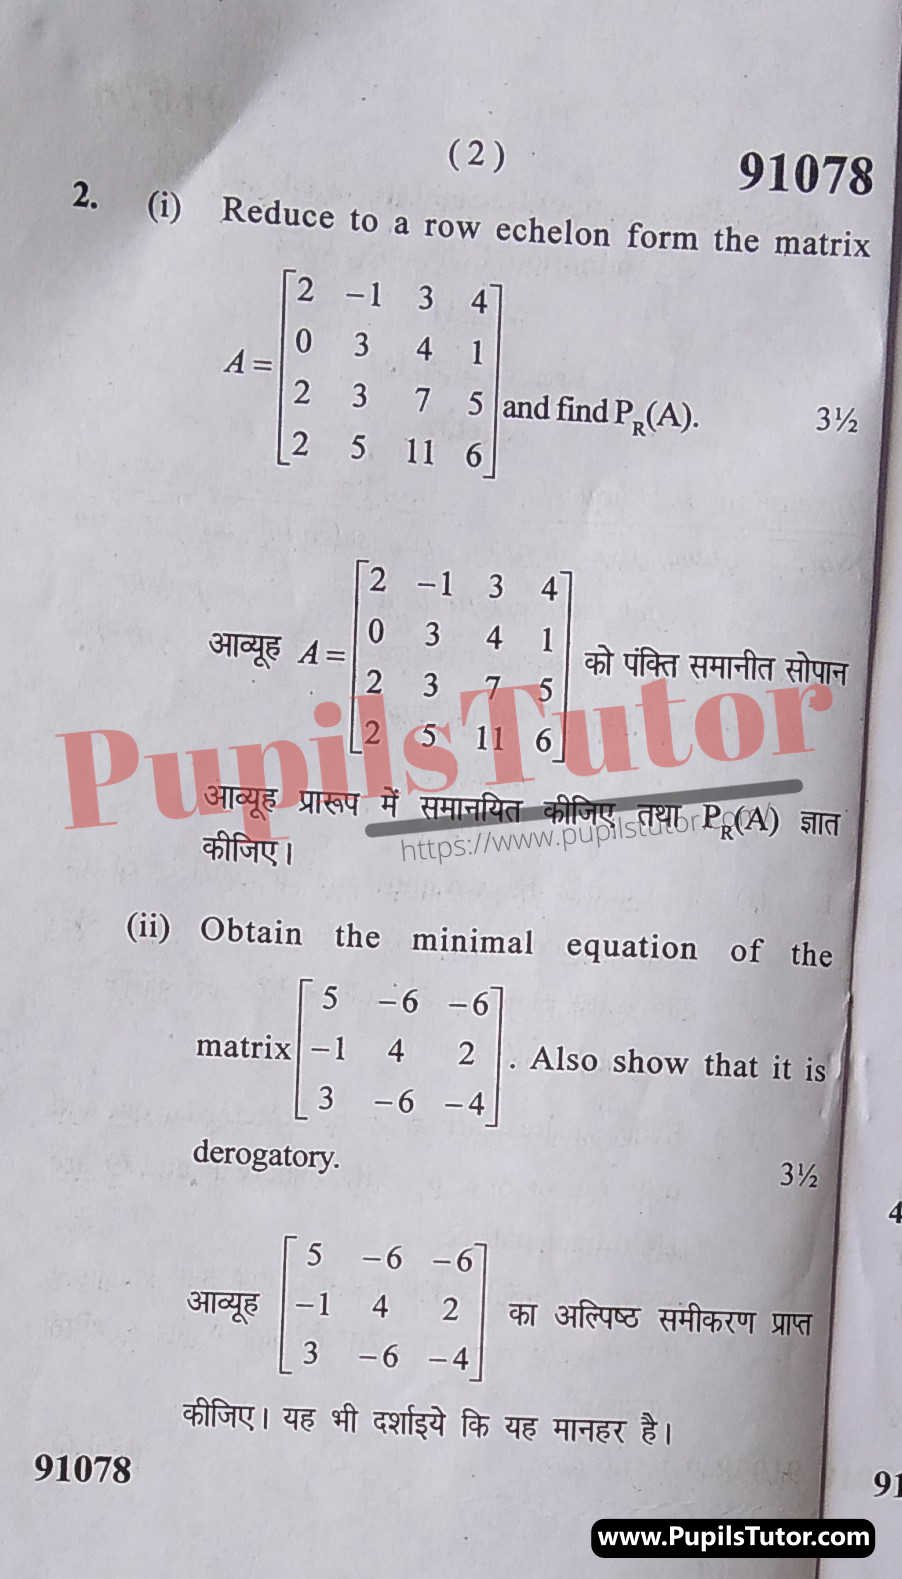 M.D. University B.Sc. [Math] Algebra First Semester Important Question Answer And Solution - www.pupilstutor.com (Paper Page Number 2)